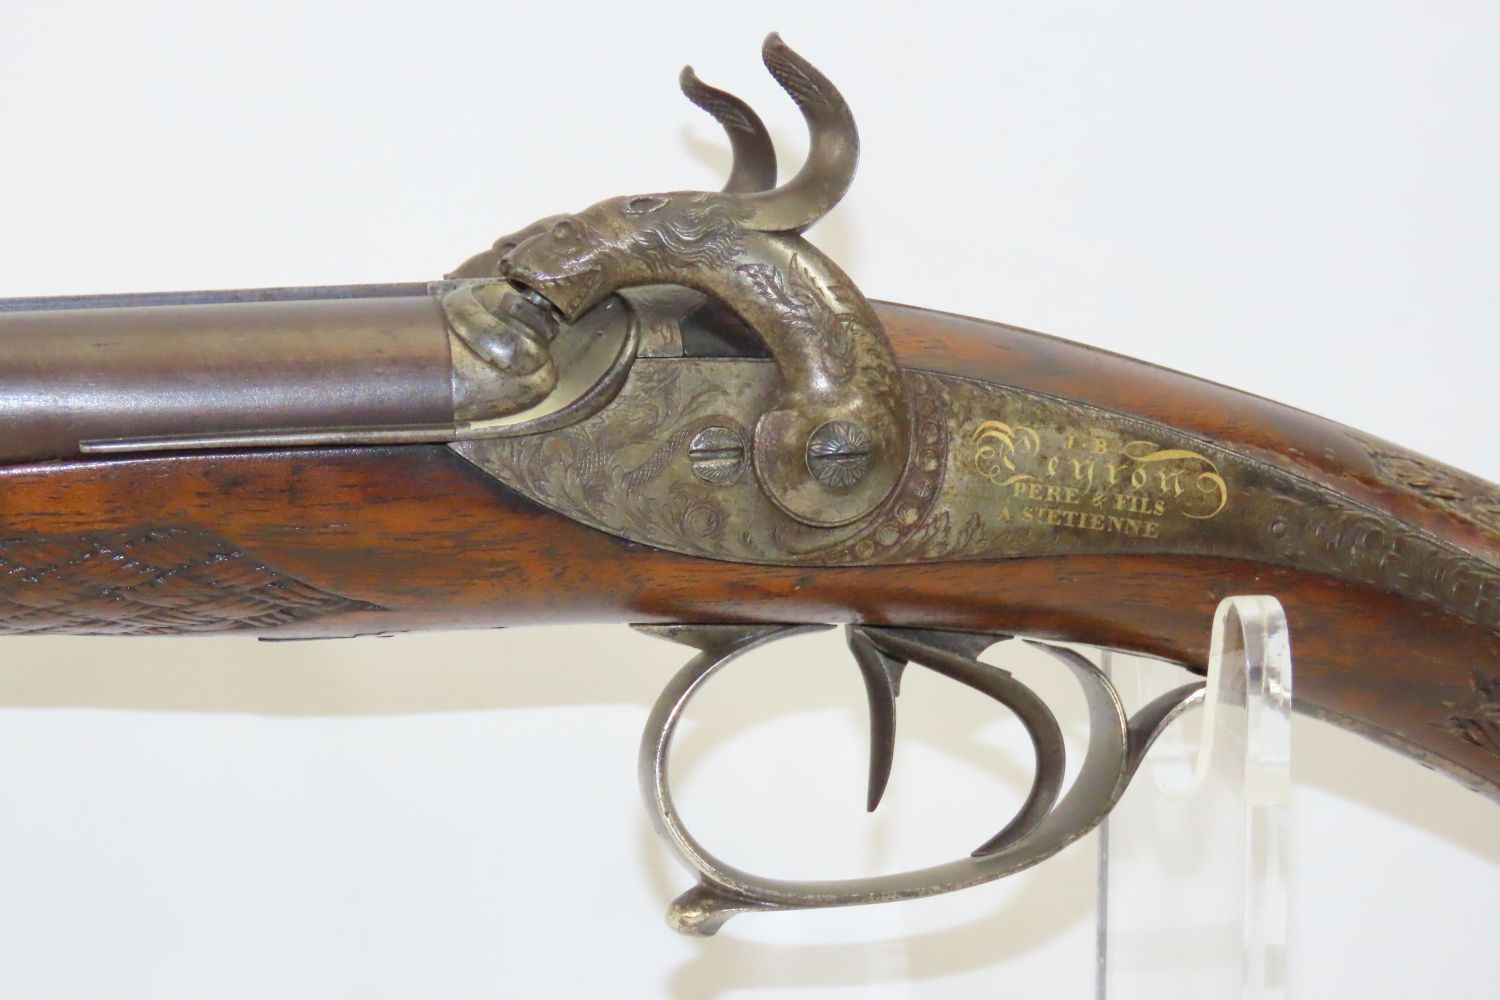 A French double-barrelled sidelock shotgun with spare barrel,Fauré Le Page  in Paris,circa 1890. Cal. 12/65,no. N 571 - A 1894. Barrel with mirror-like  bore made of Bernard Damascus,French proof mark,pearl machined midrib